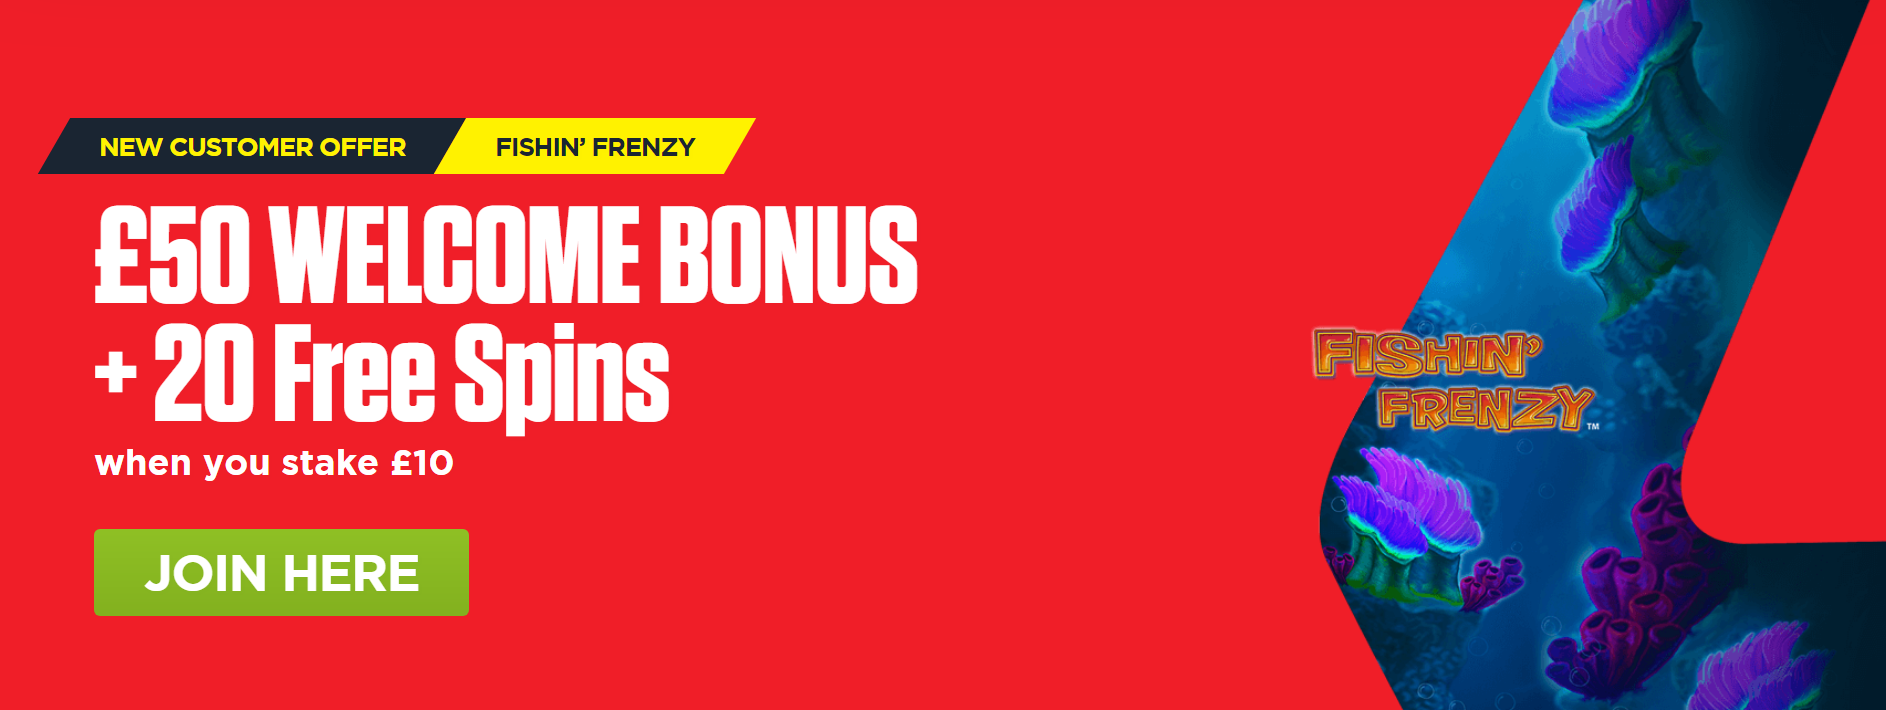 ladbrokes welcome offer